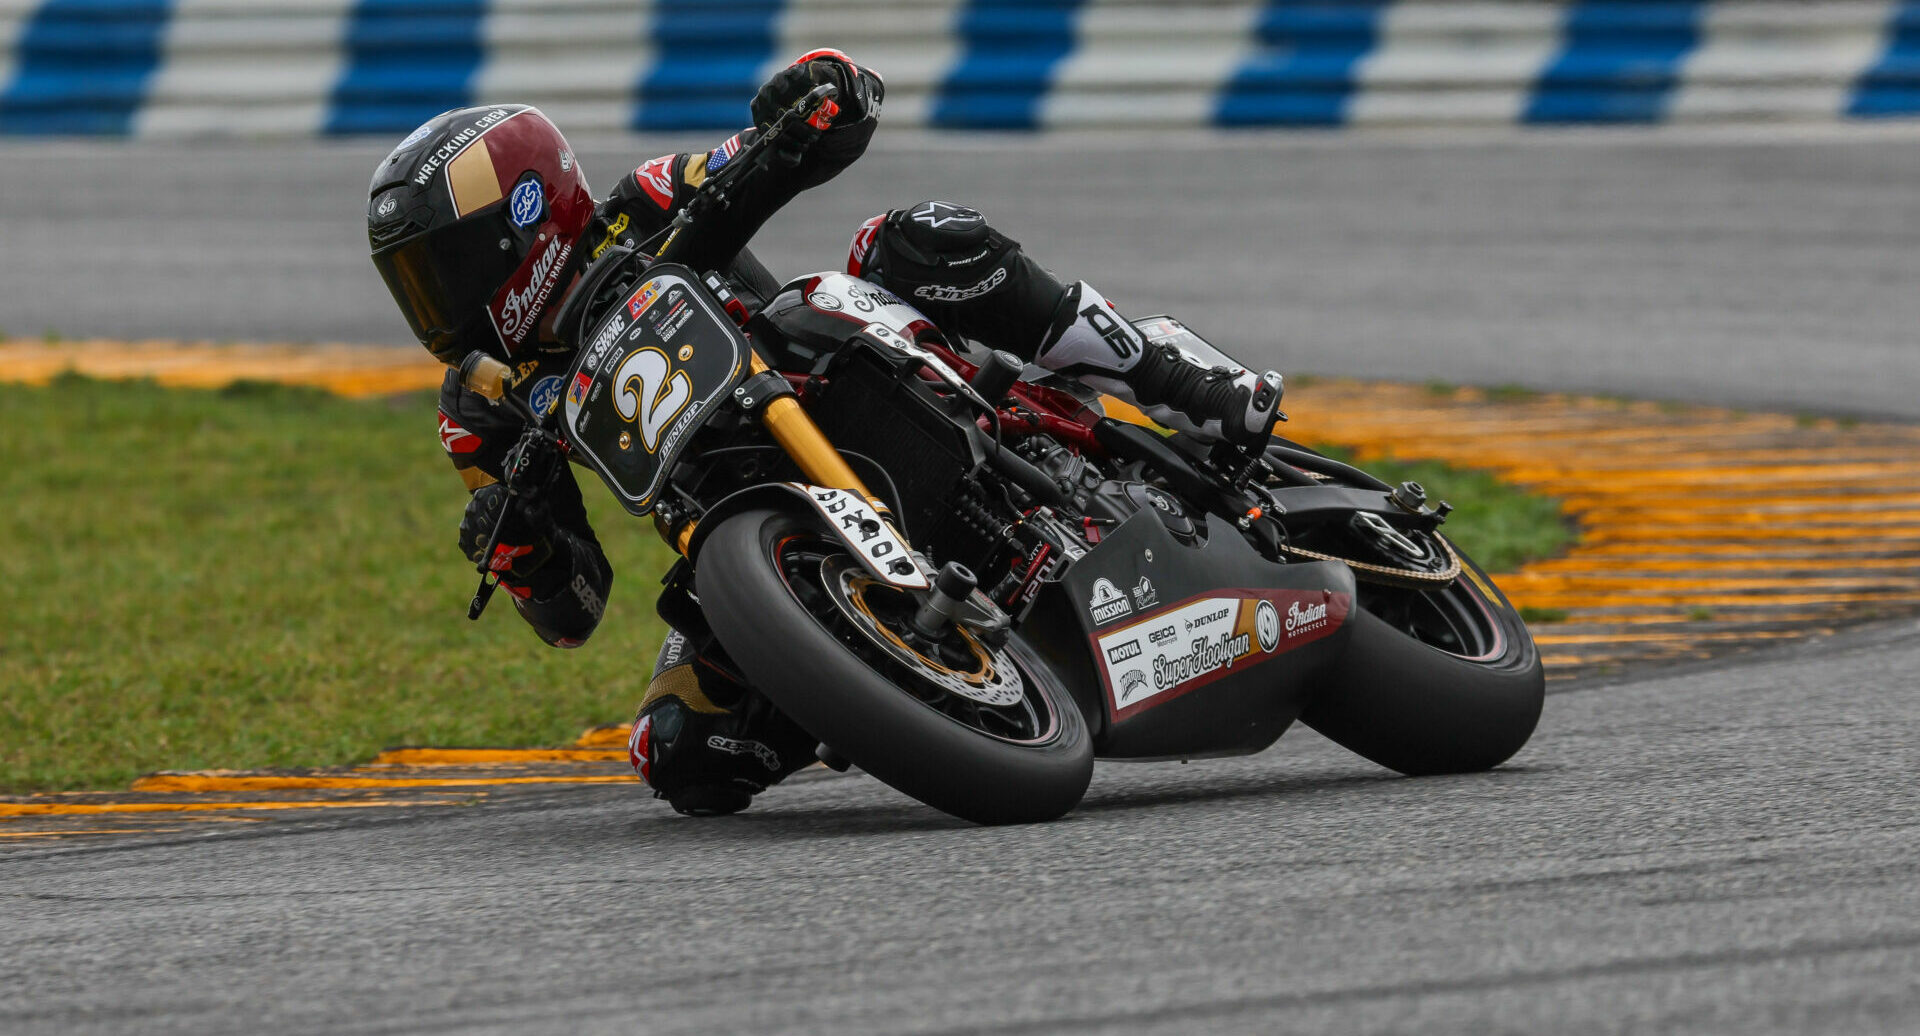 Tyler O'Hara (2) on his Indian FTR1200 at Daytona earlier this year. Photo by Brian J. Nelson.